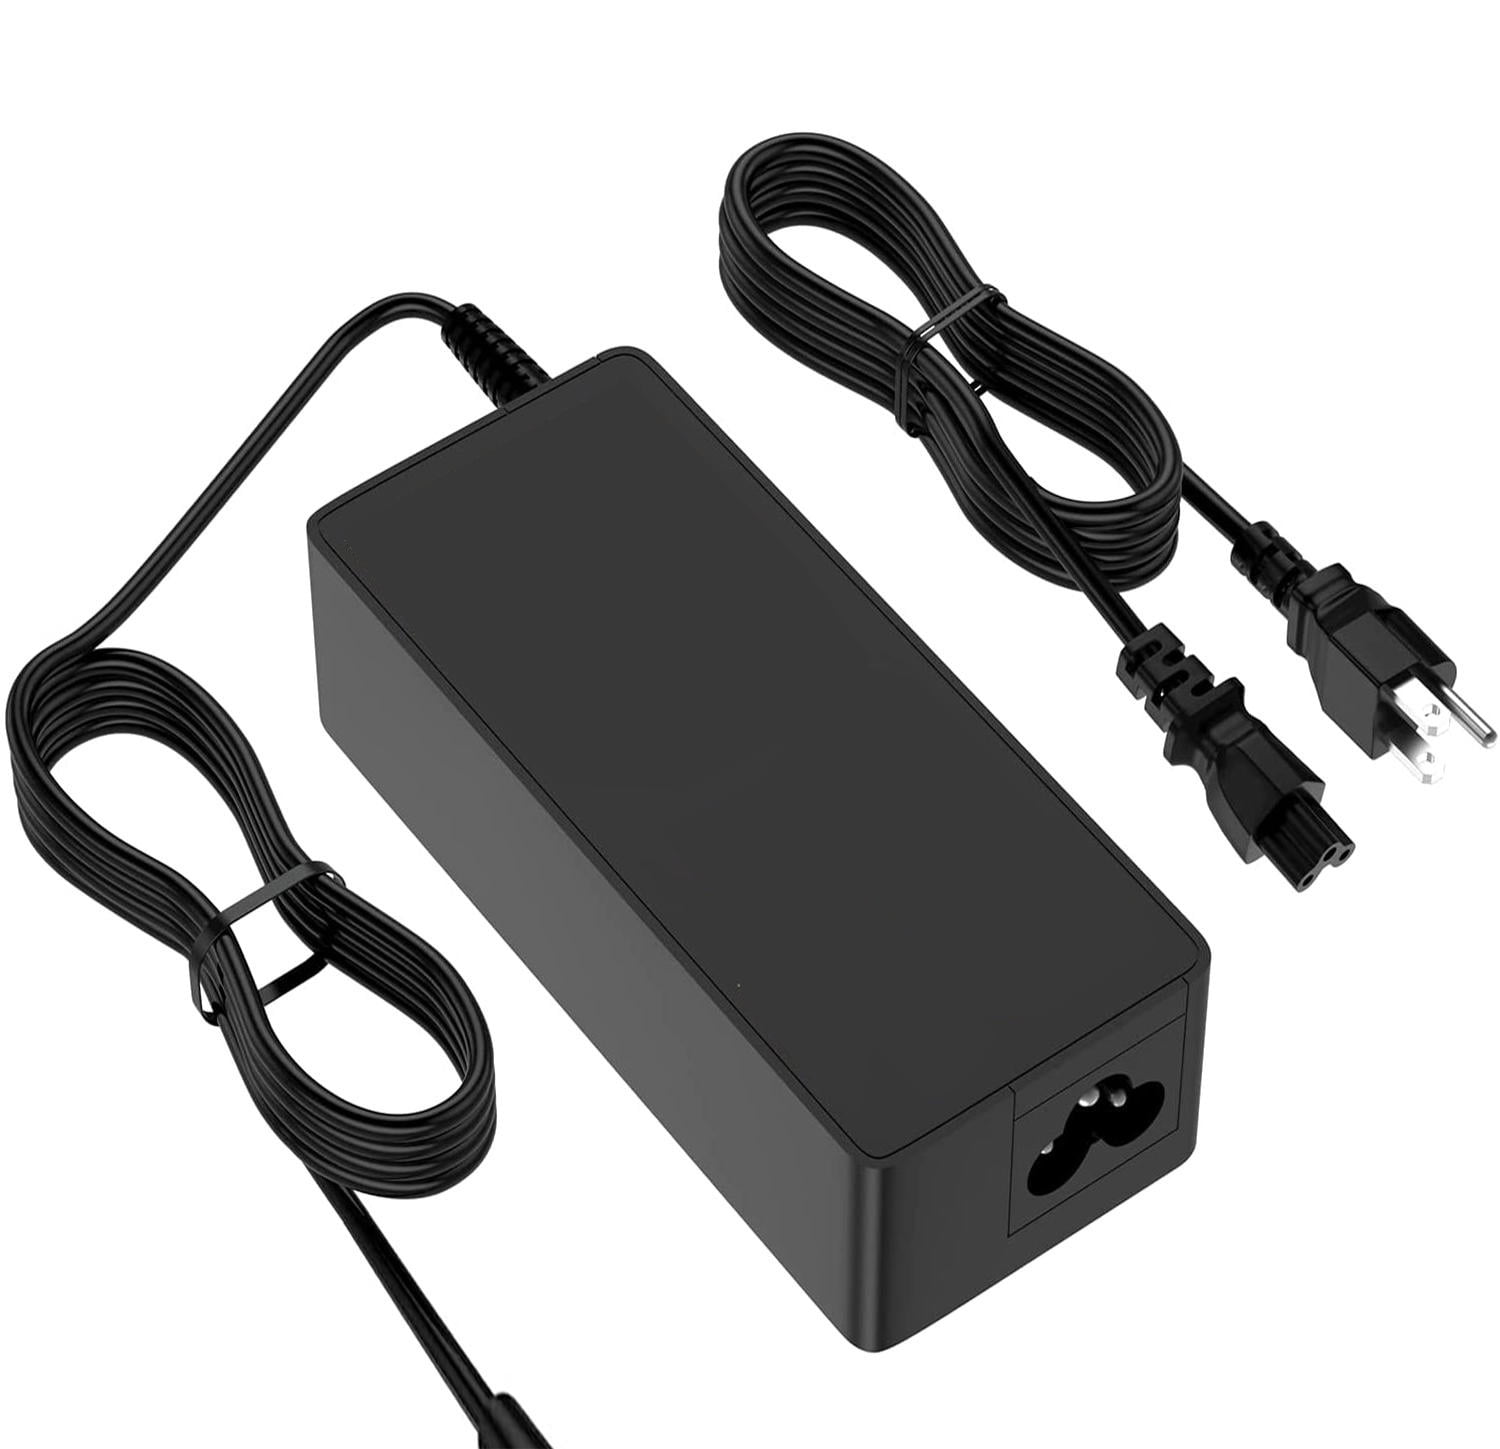 Guy-Tech AC/DC Adapter Compatible with Logitech S-00118 UE Air Wireless Speaker & Recharging Dock Power Supply Cord Cable PS Charger Input: 100 - 240 VAC 50/60Hz Worldwide Use Walmart.com